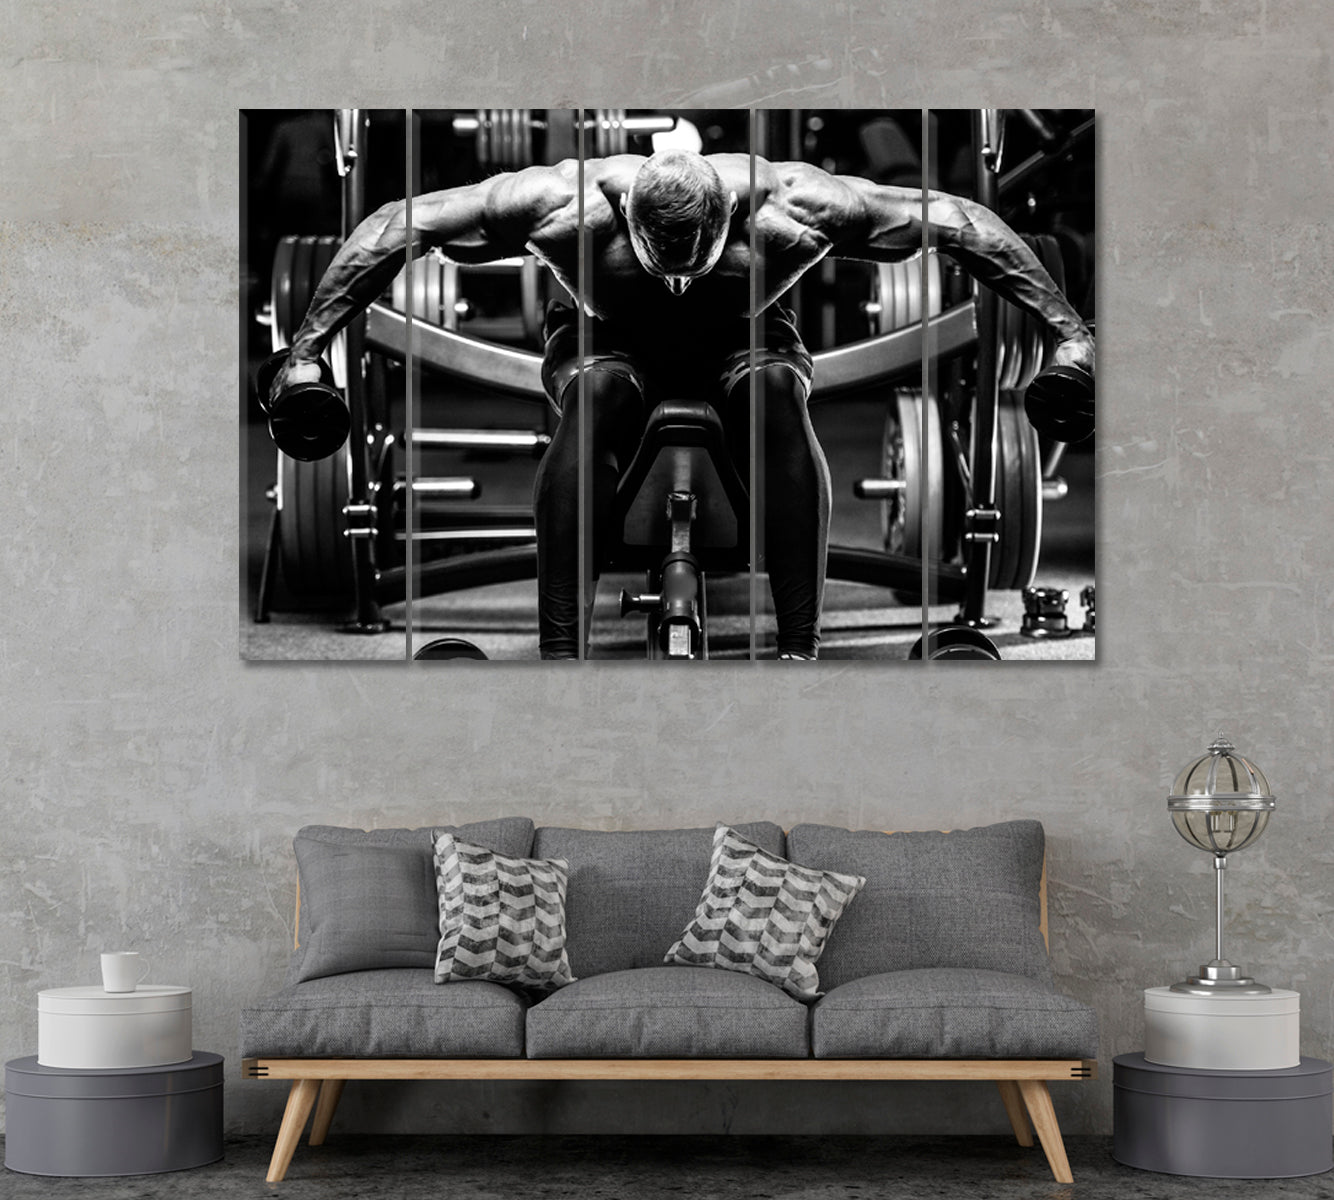 Bodybuilding Workout Canvas Print ArtLexy 5 Panels 36"x24" inches 